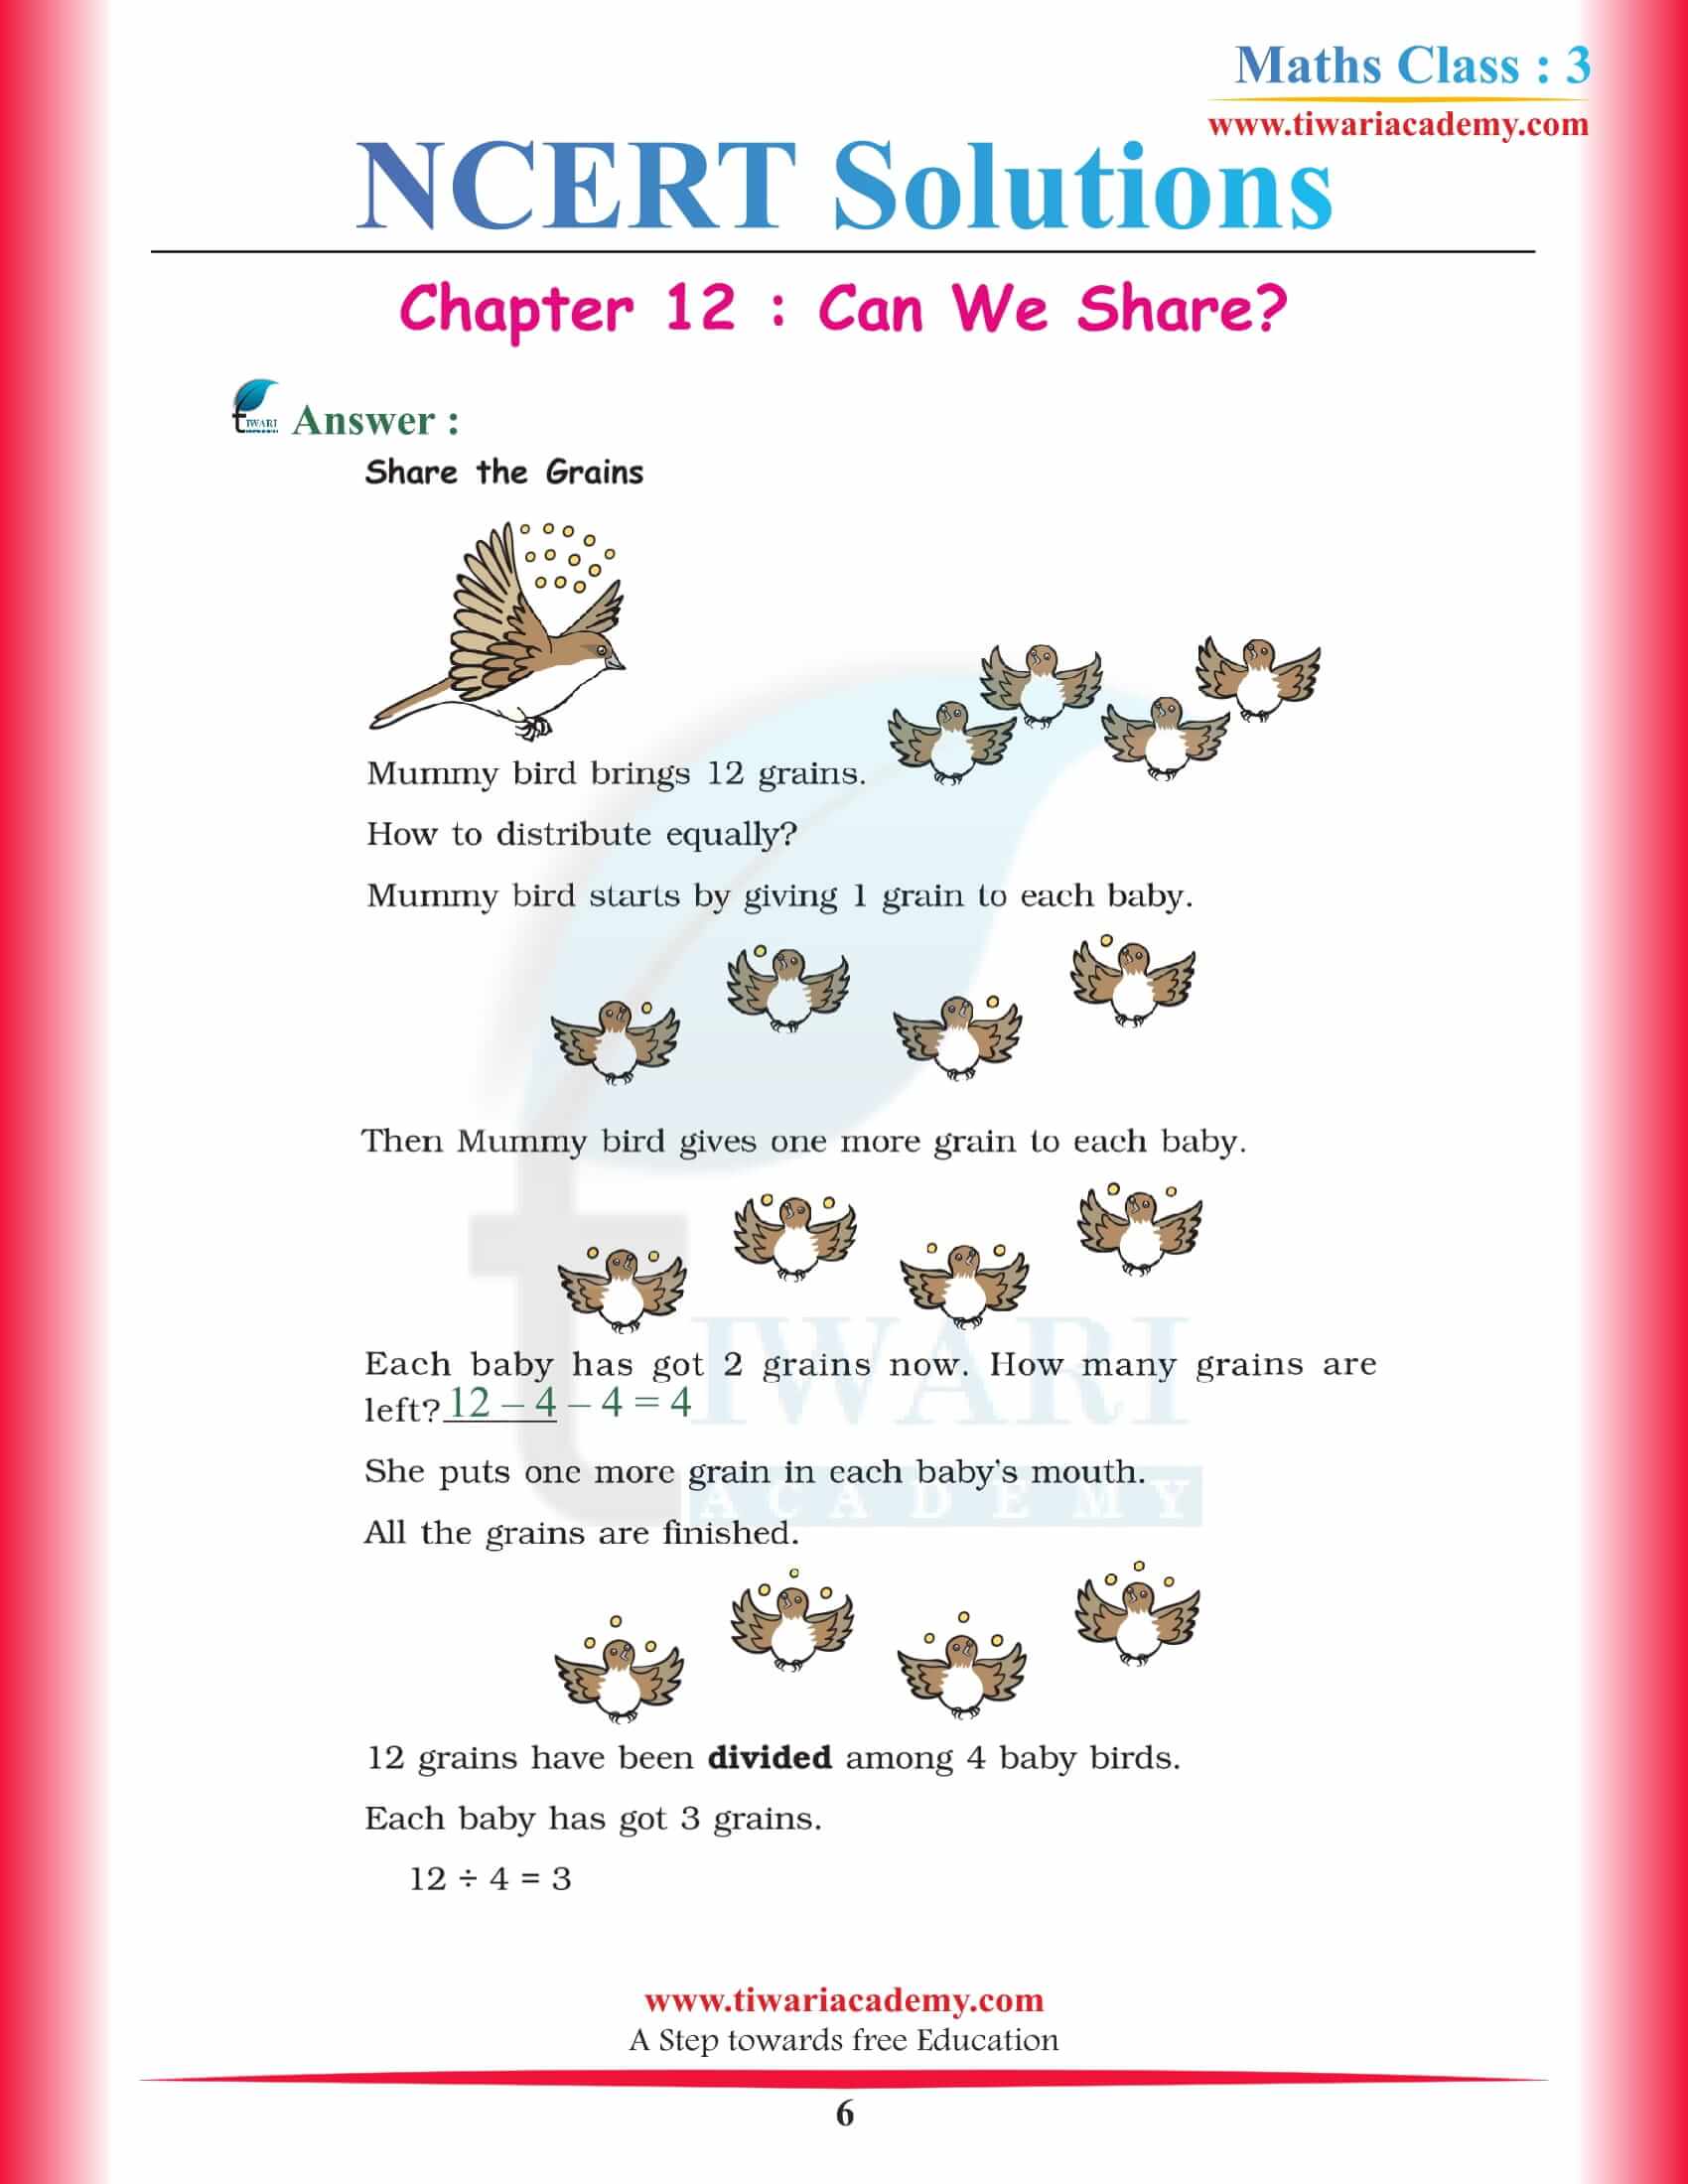 NCERT Solutions for Class 3 Maths Chapter 12 pdf file